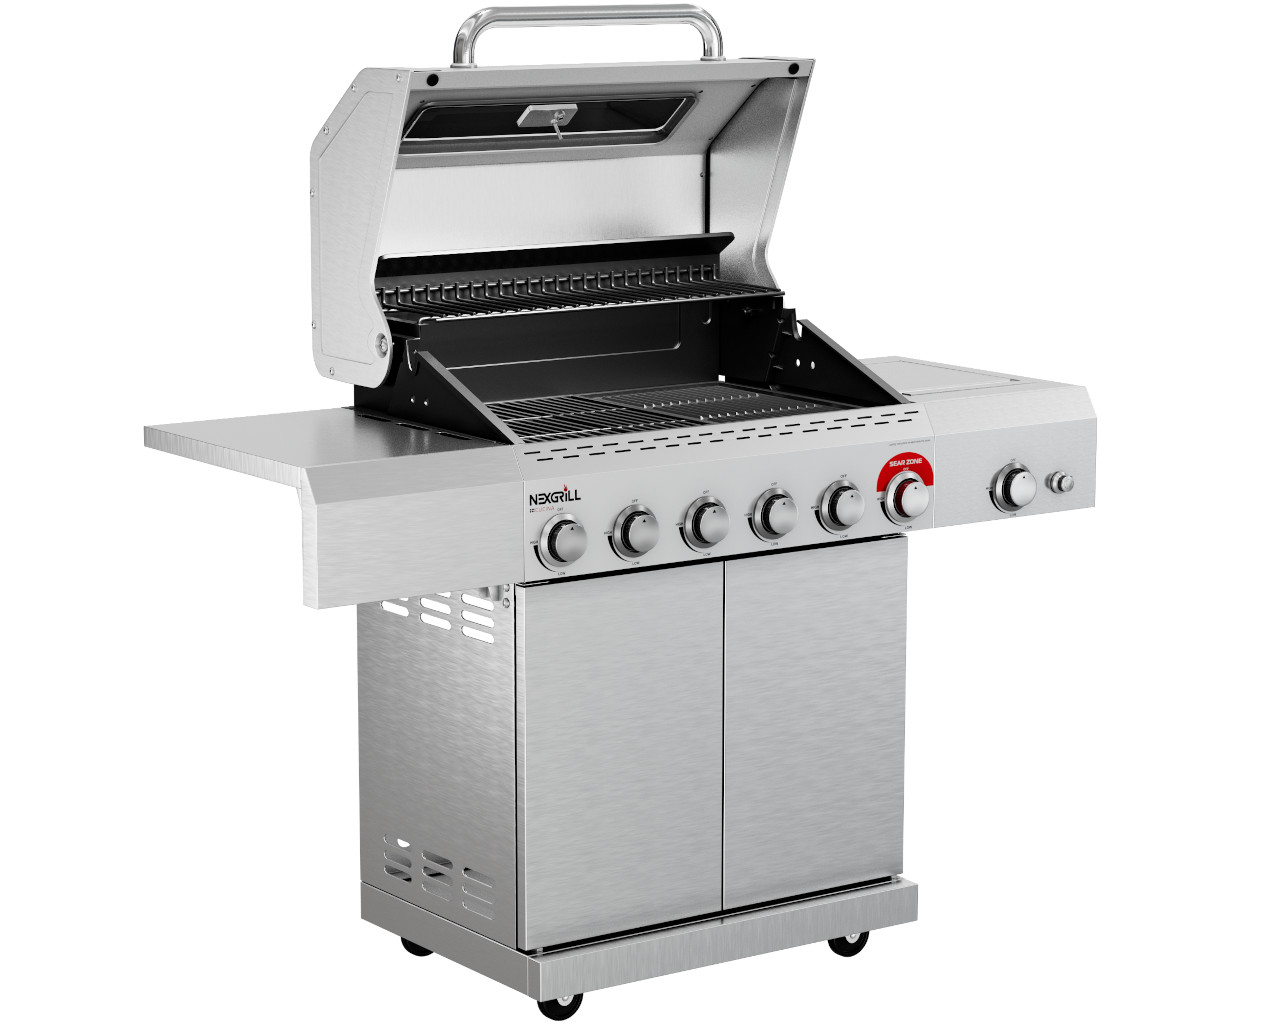 Nexgrill Cucina 6 Burner BBQ with Sear Zone and Side Burner, , hi-res image number null